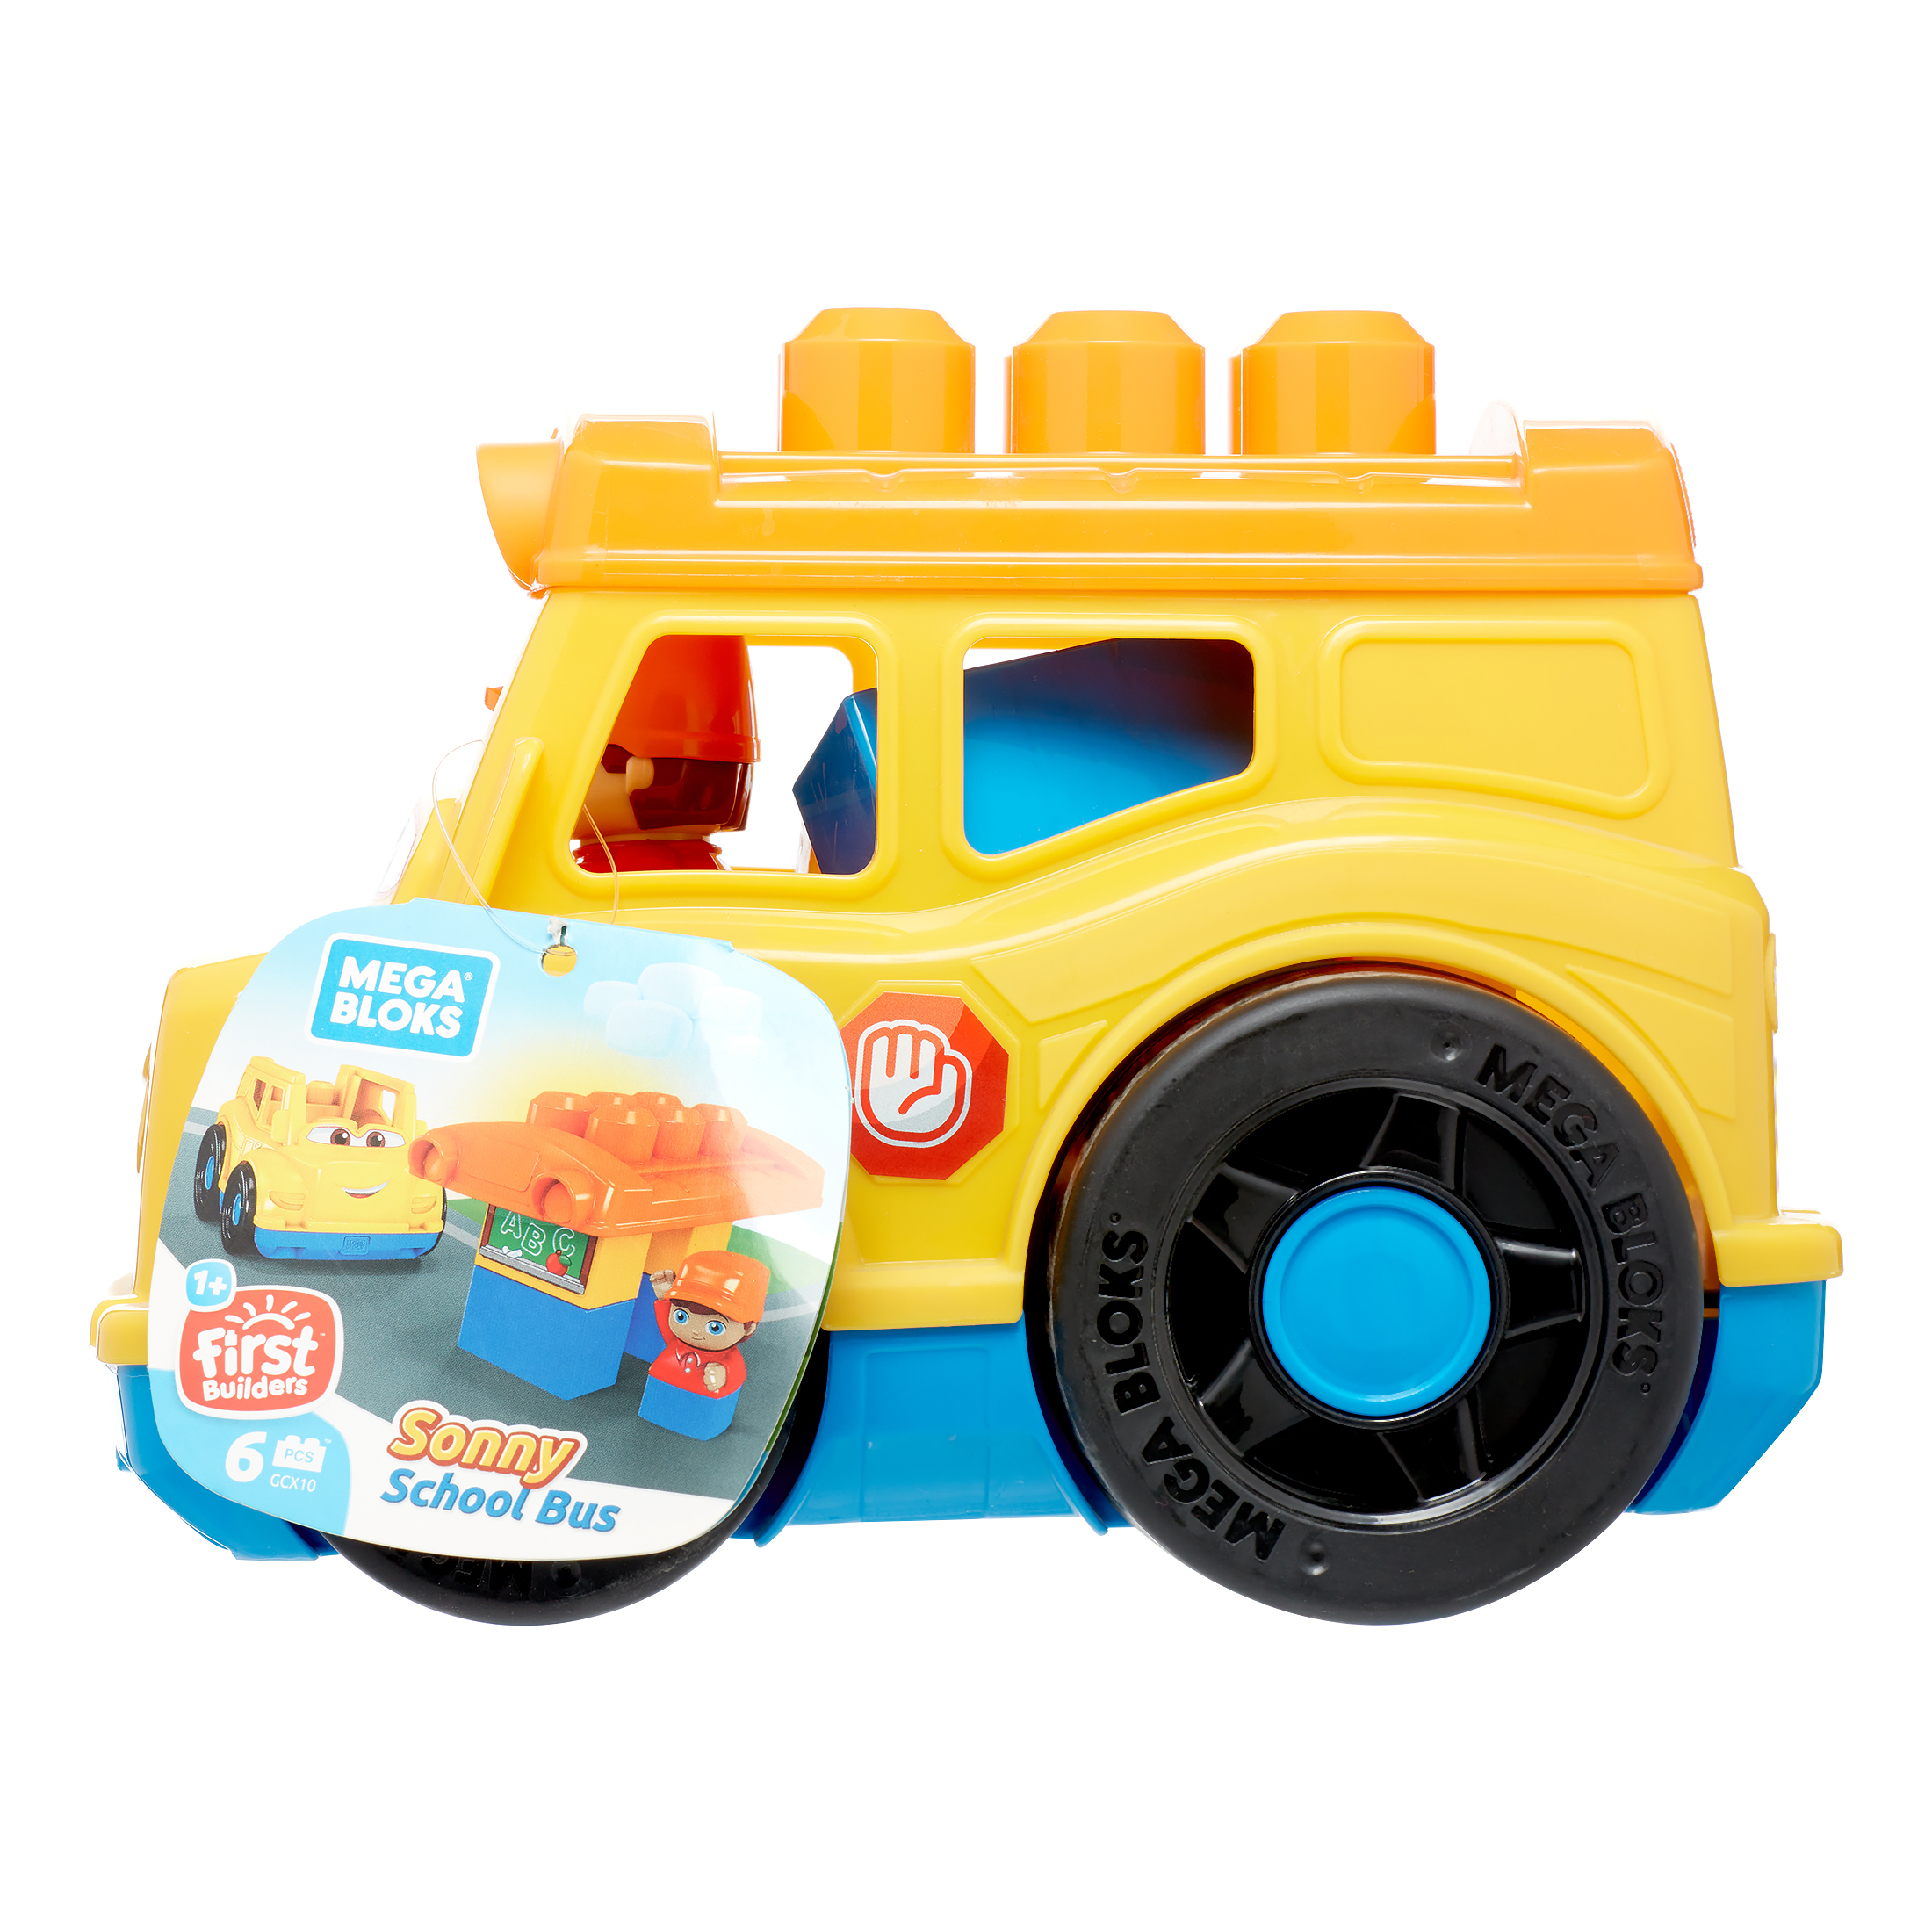 Mega Bloks First Builders Sonny School Bus with Big Building Blocks, Building Toys for Toddlers (6 Pieces) - image 3 of 8